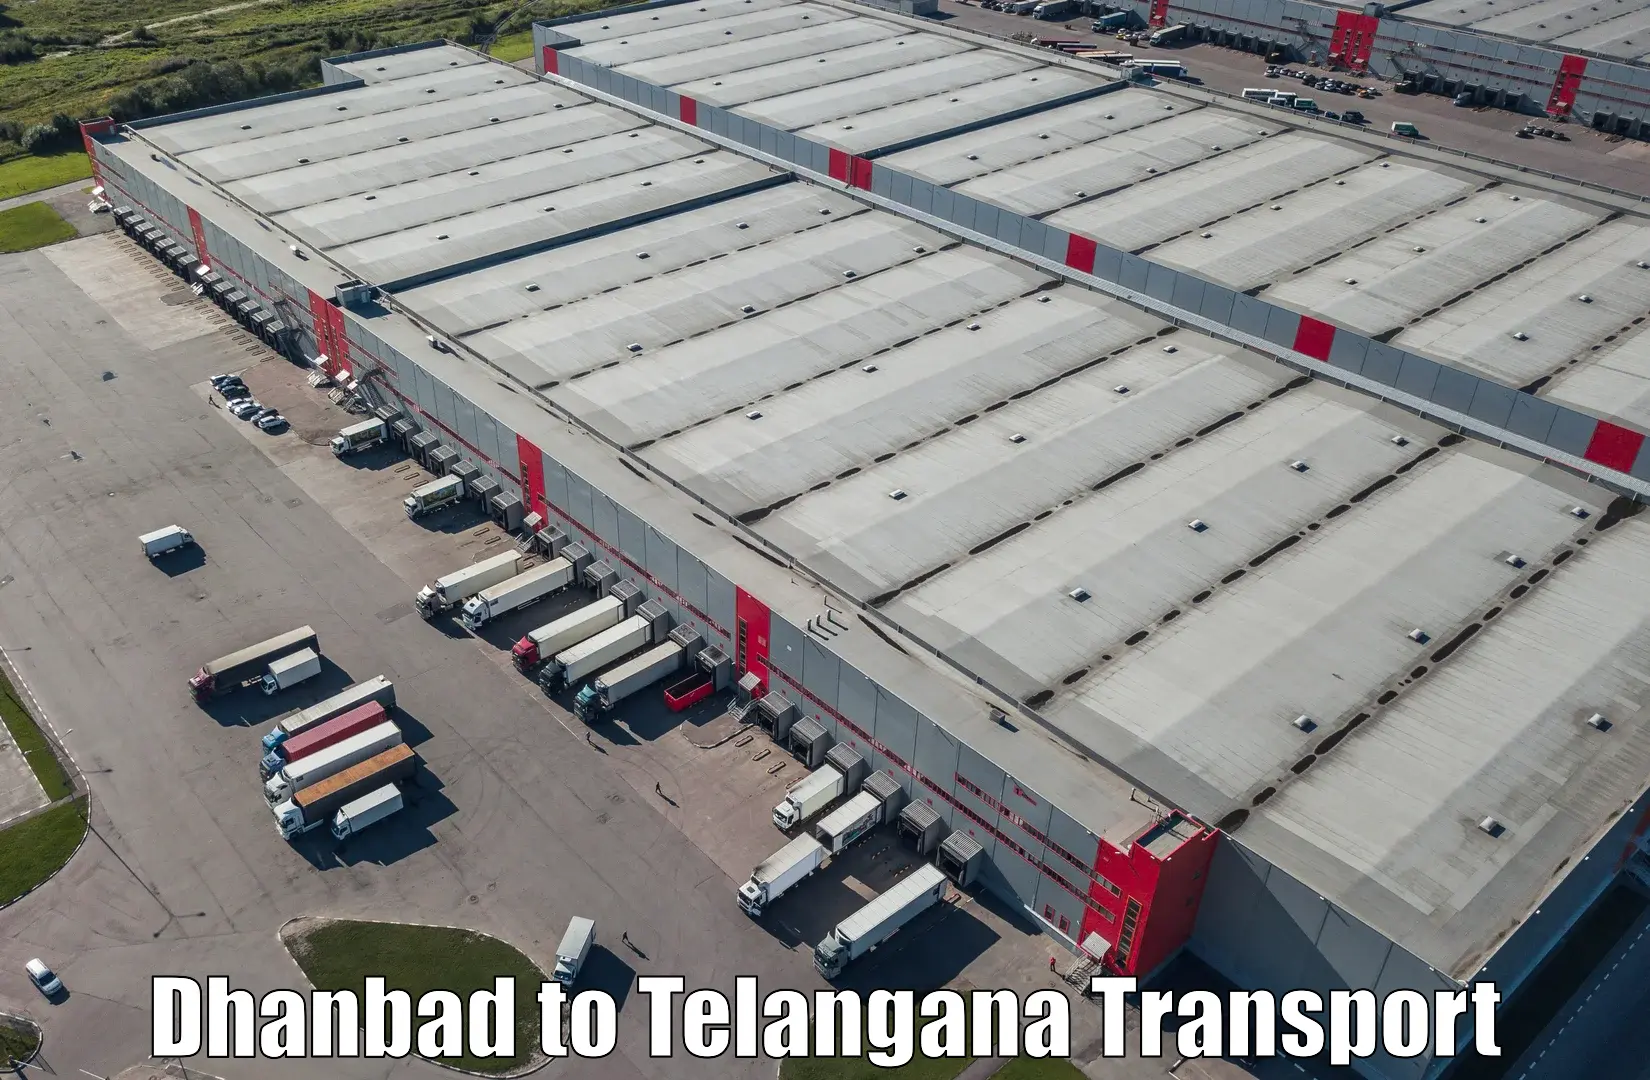 Road transport online services in Dhanbad to Boath Buzurg